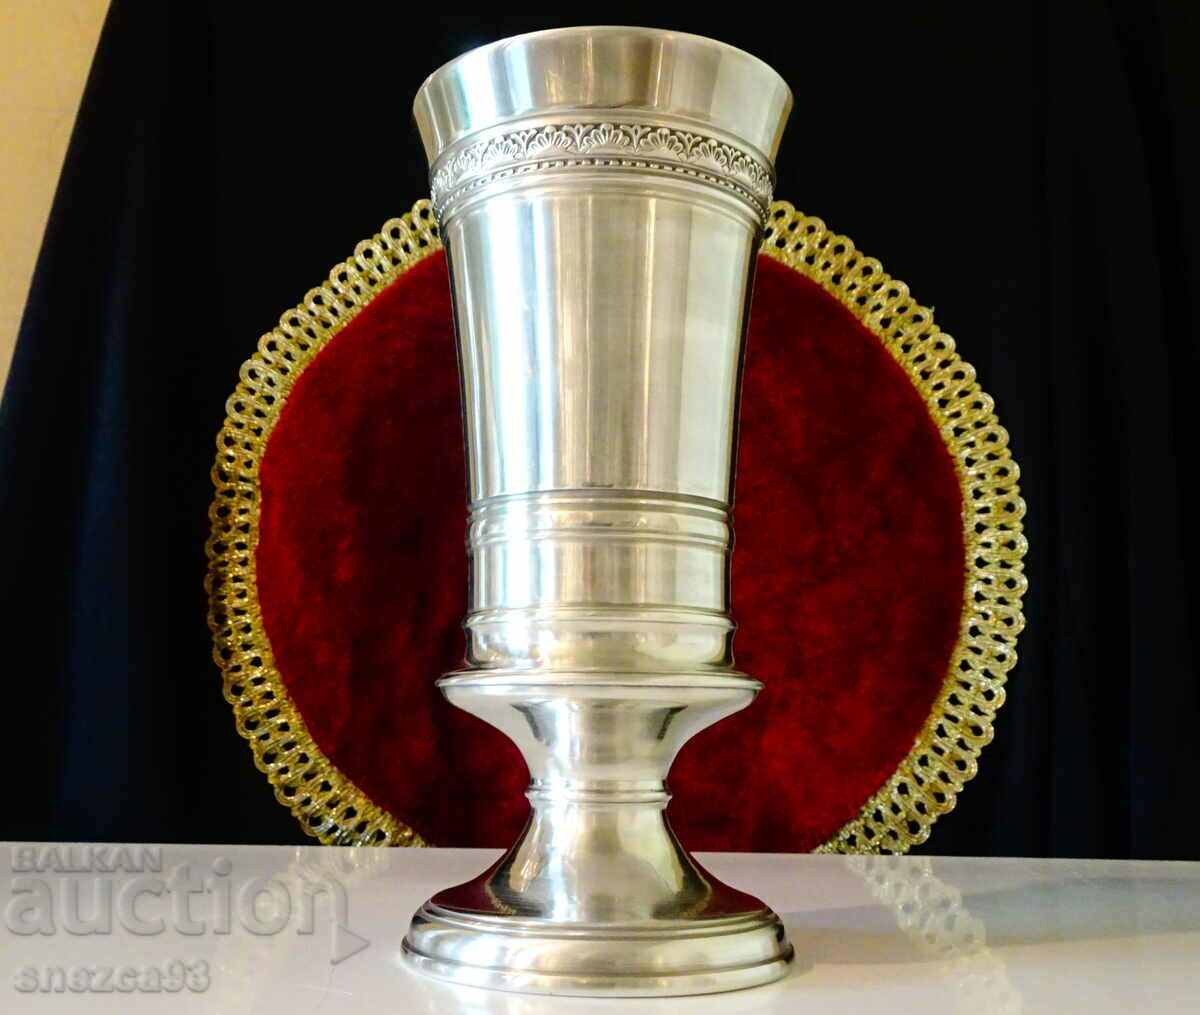 Magnificent goblet, WMF pewter glass.